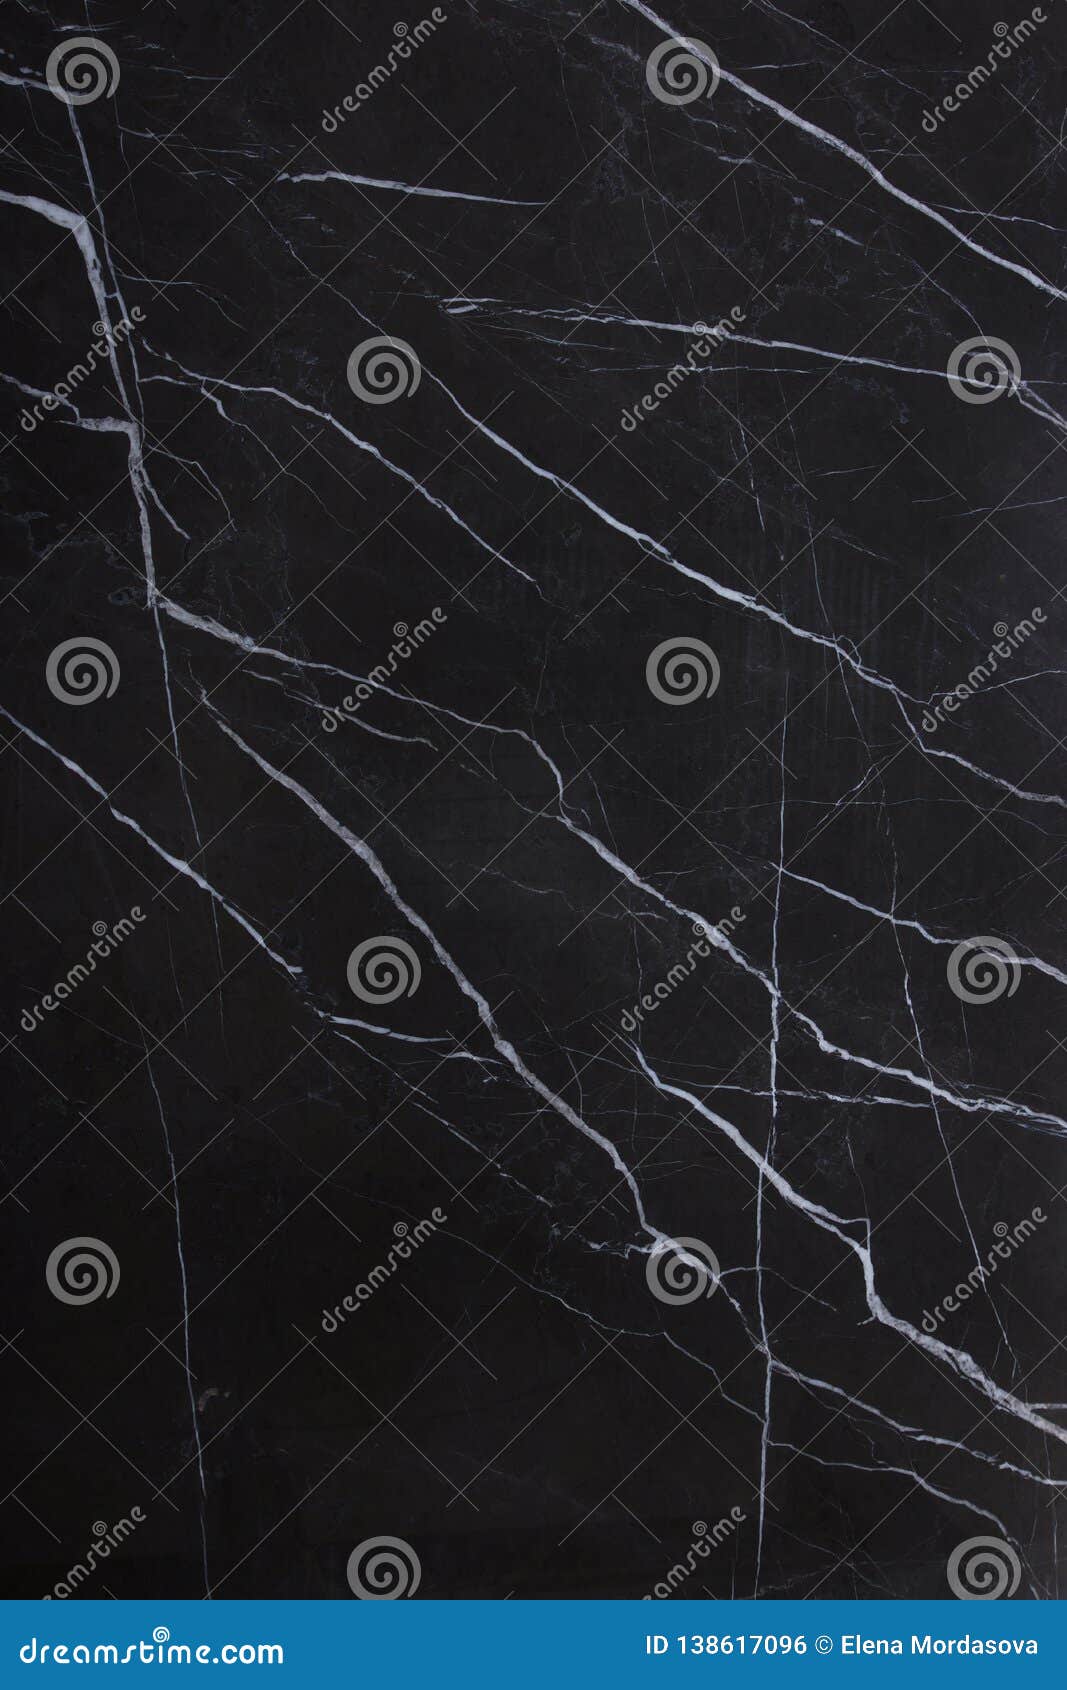 the texture of natural stone is black marble with patterns and white stripes, the stone is called nero marquina